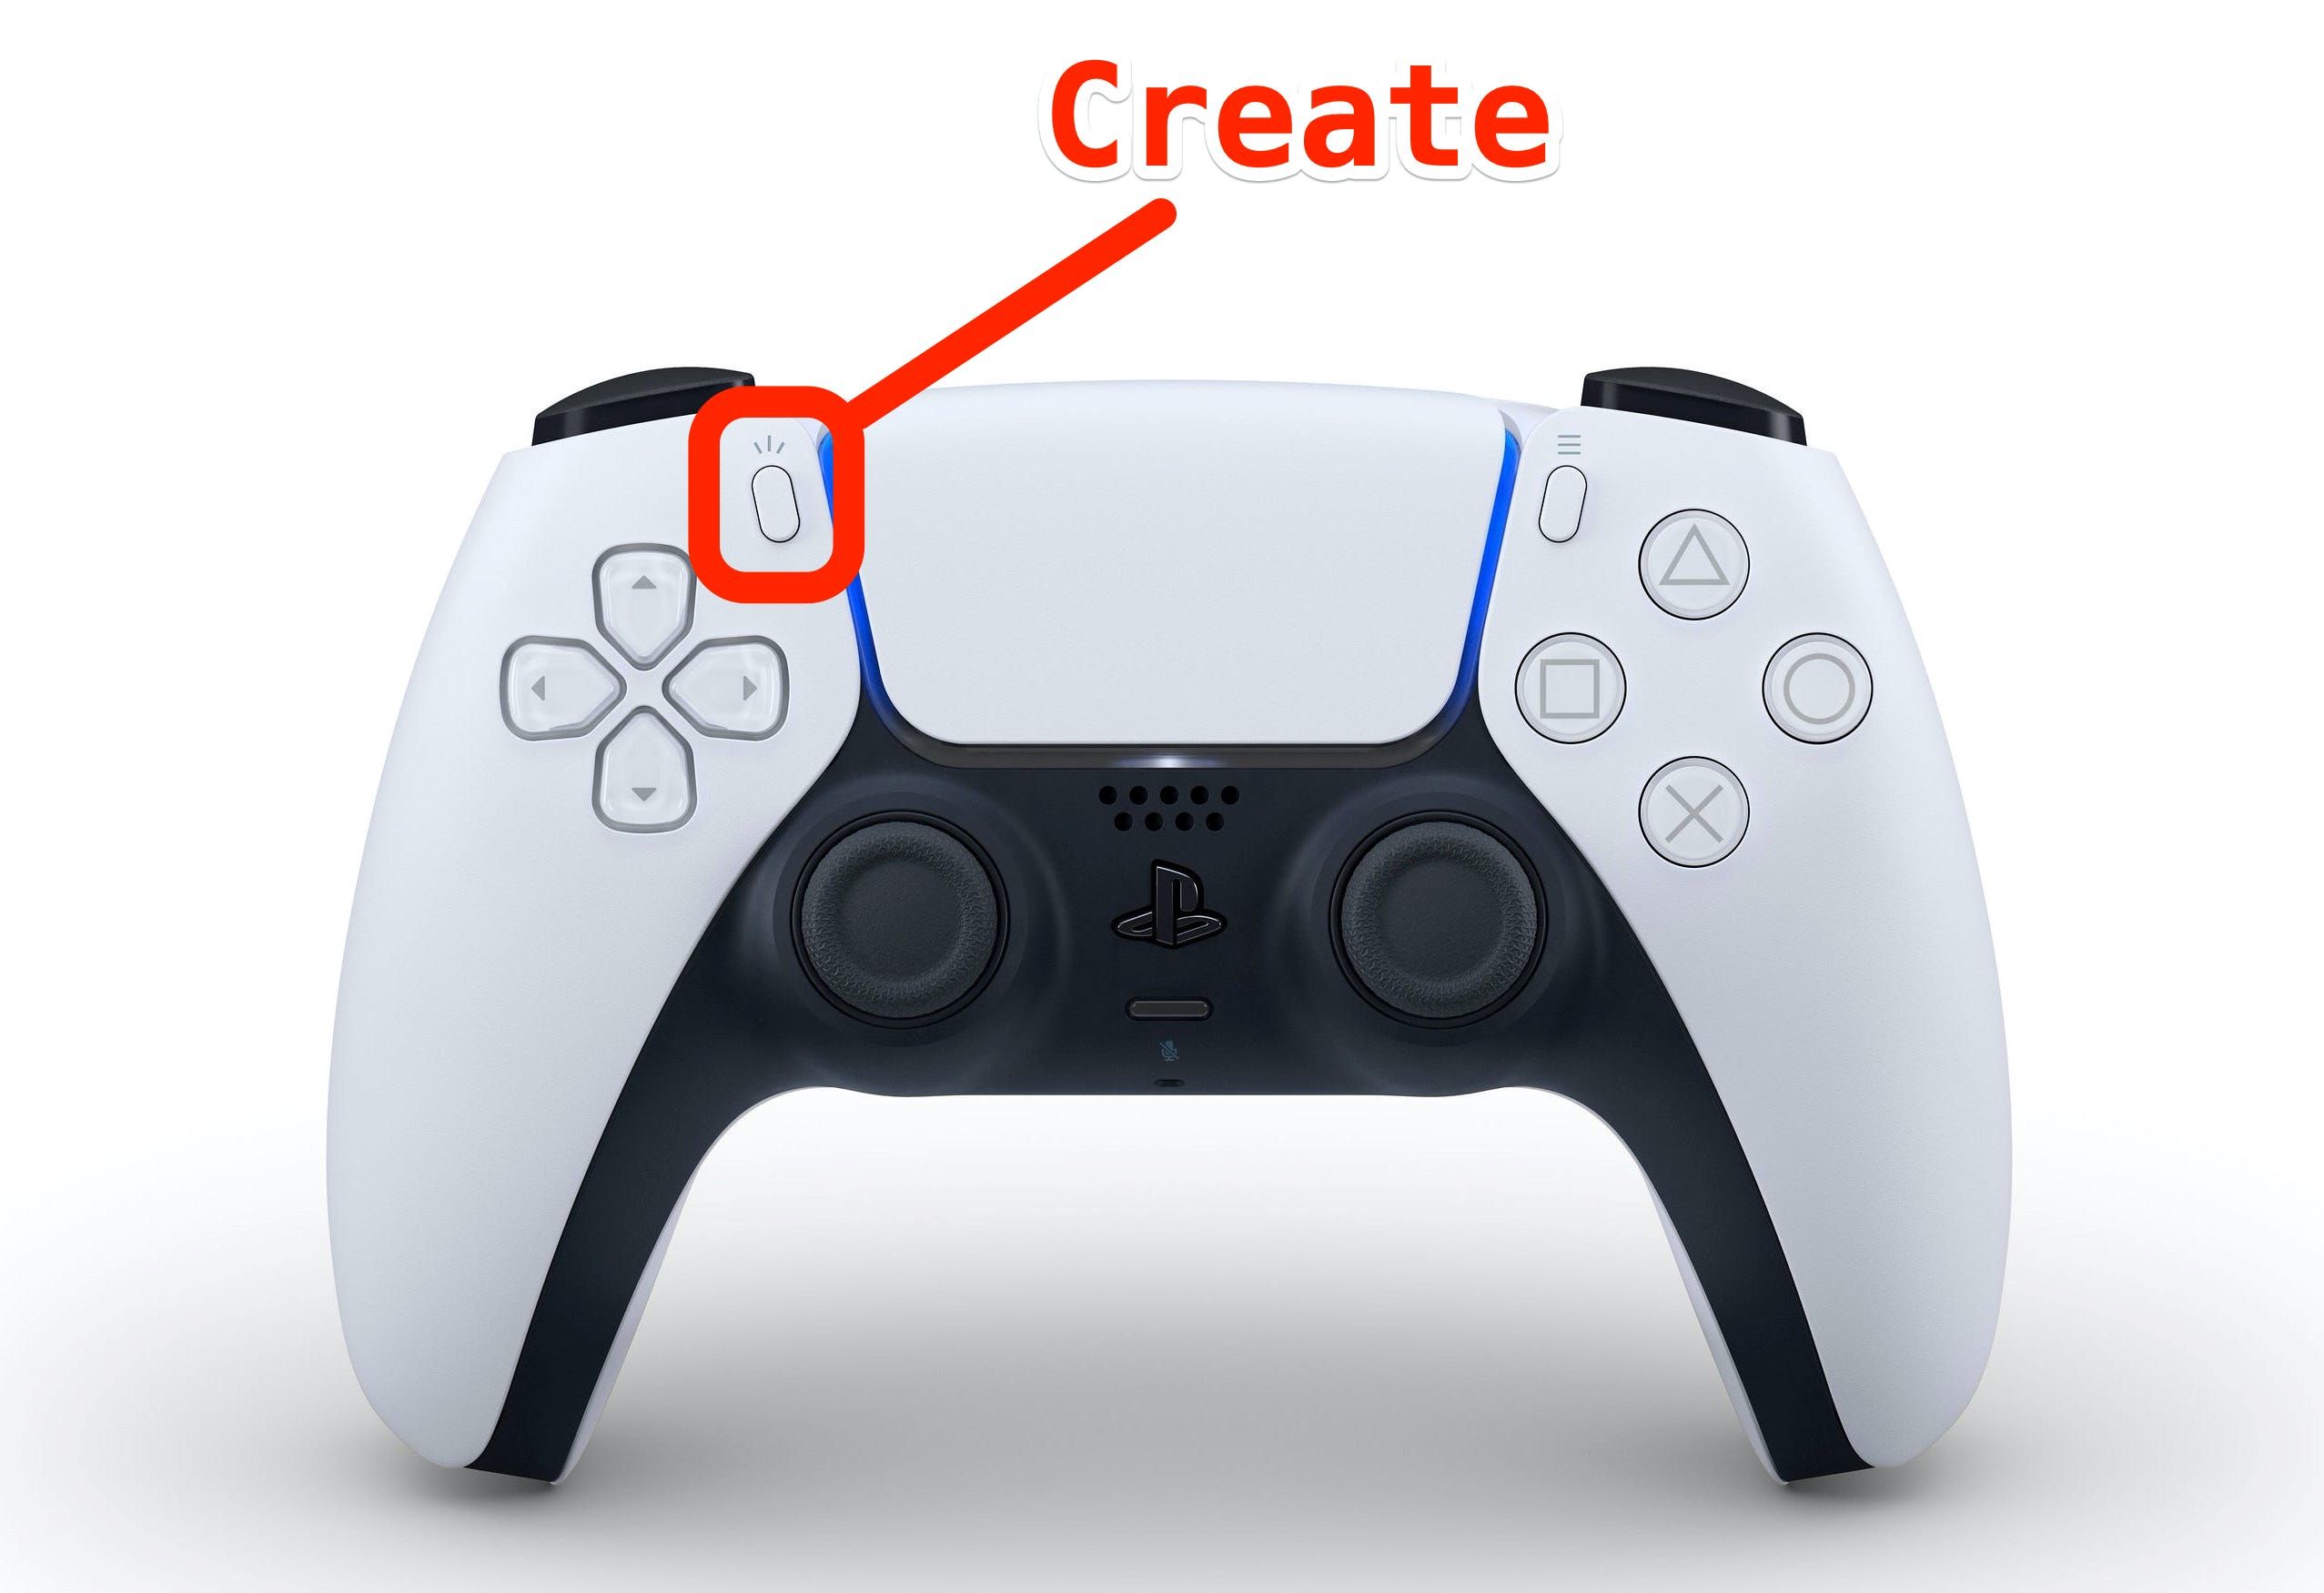 what-is-the-create-button-on-ps5